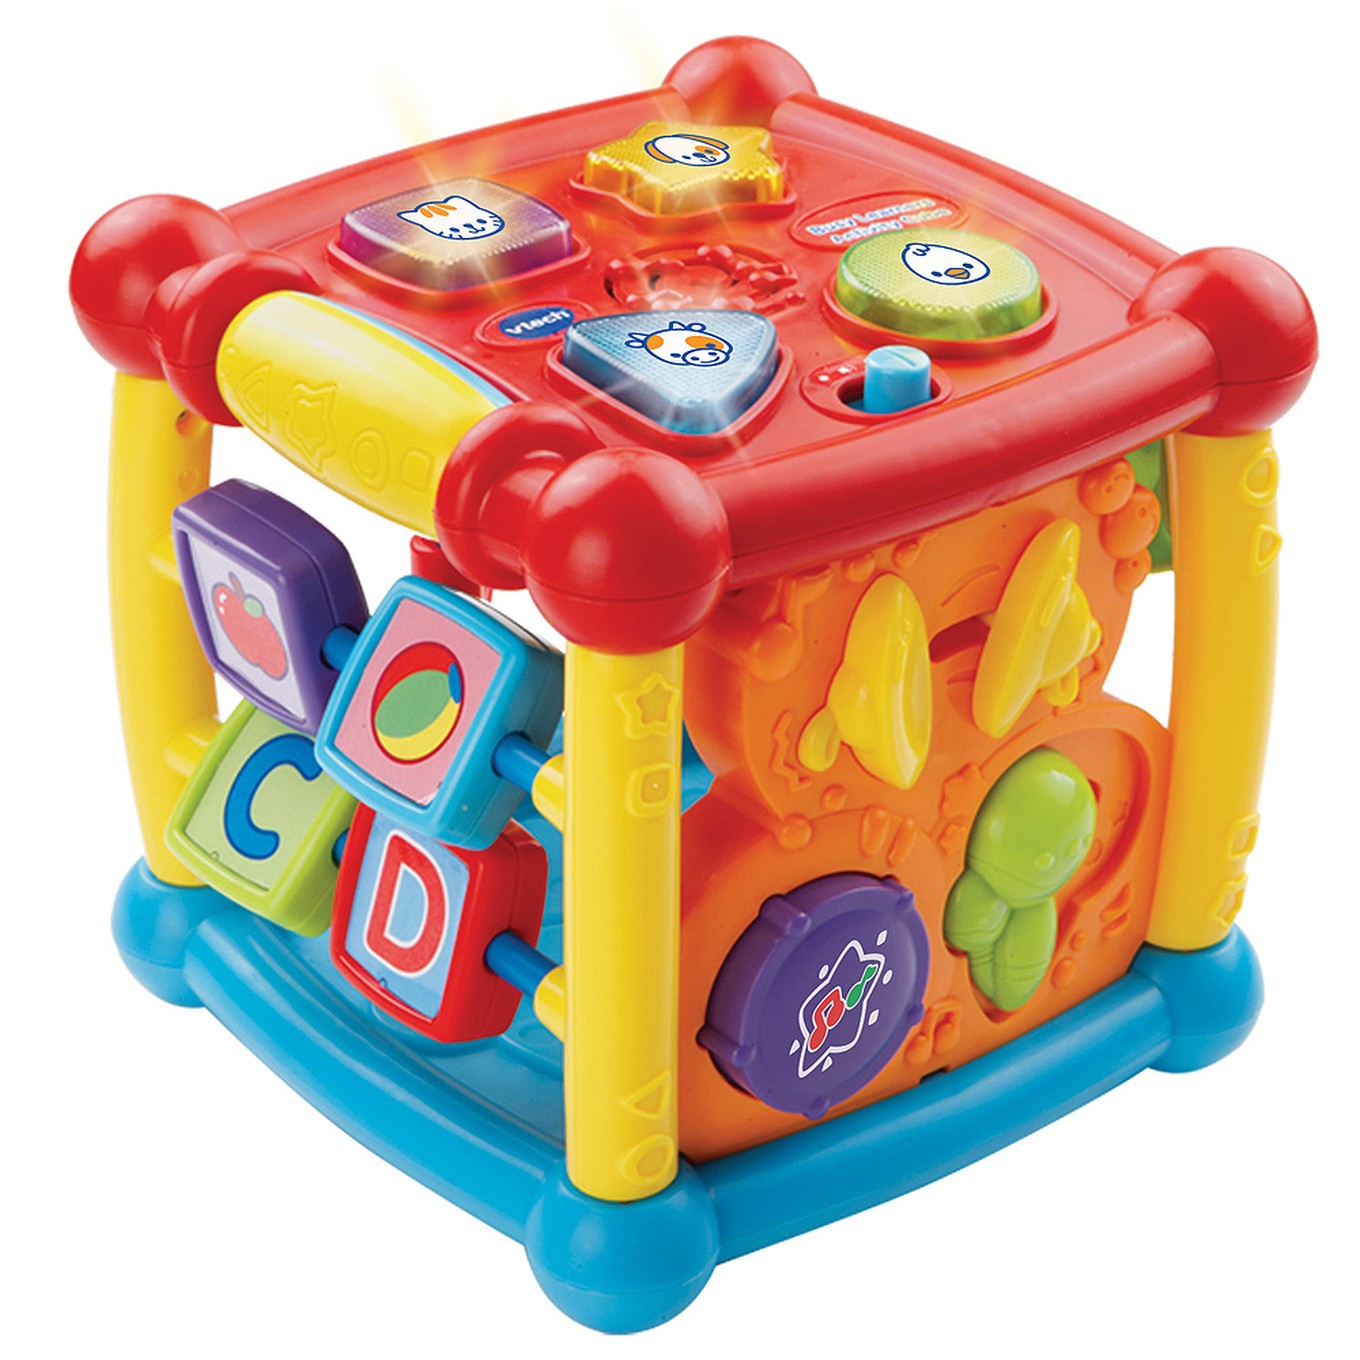 Vtech Baby Toddler & Childrens Learning Toys - Walkers/Ride Ons/Musical &  More